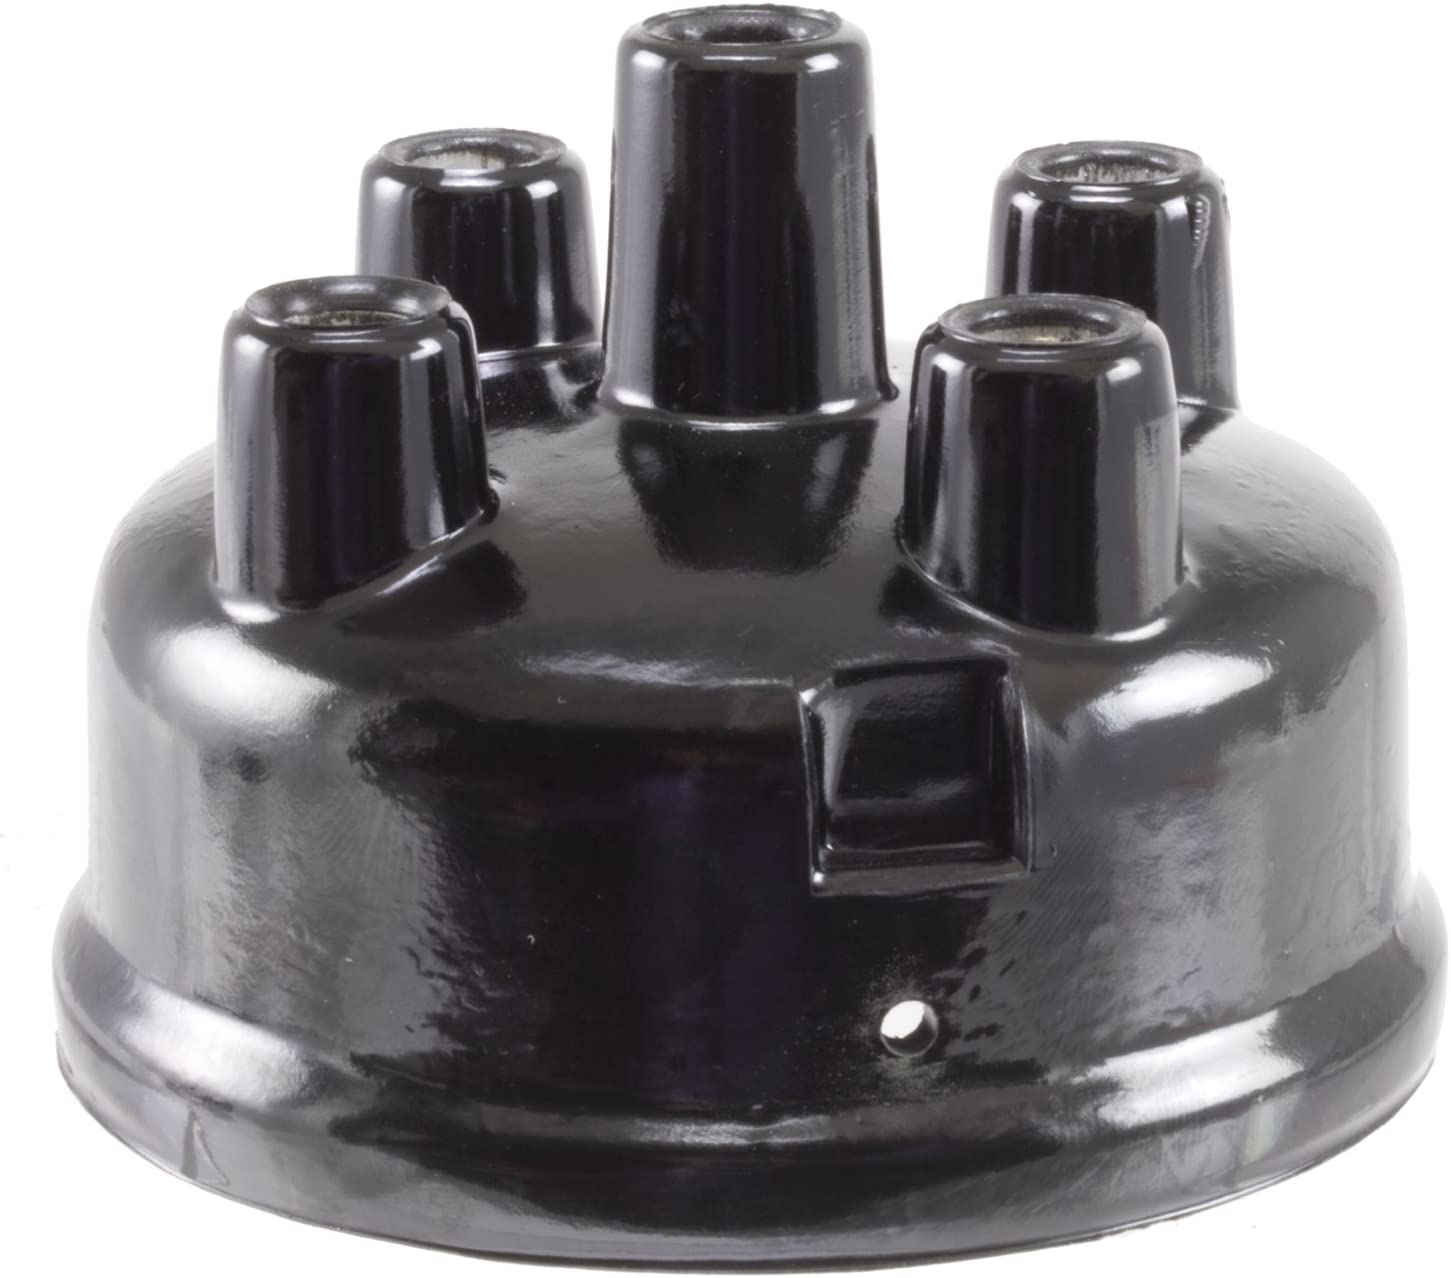 ACDelco A306 Professional Ignition Distributor Cap